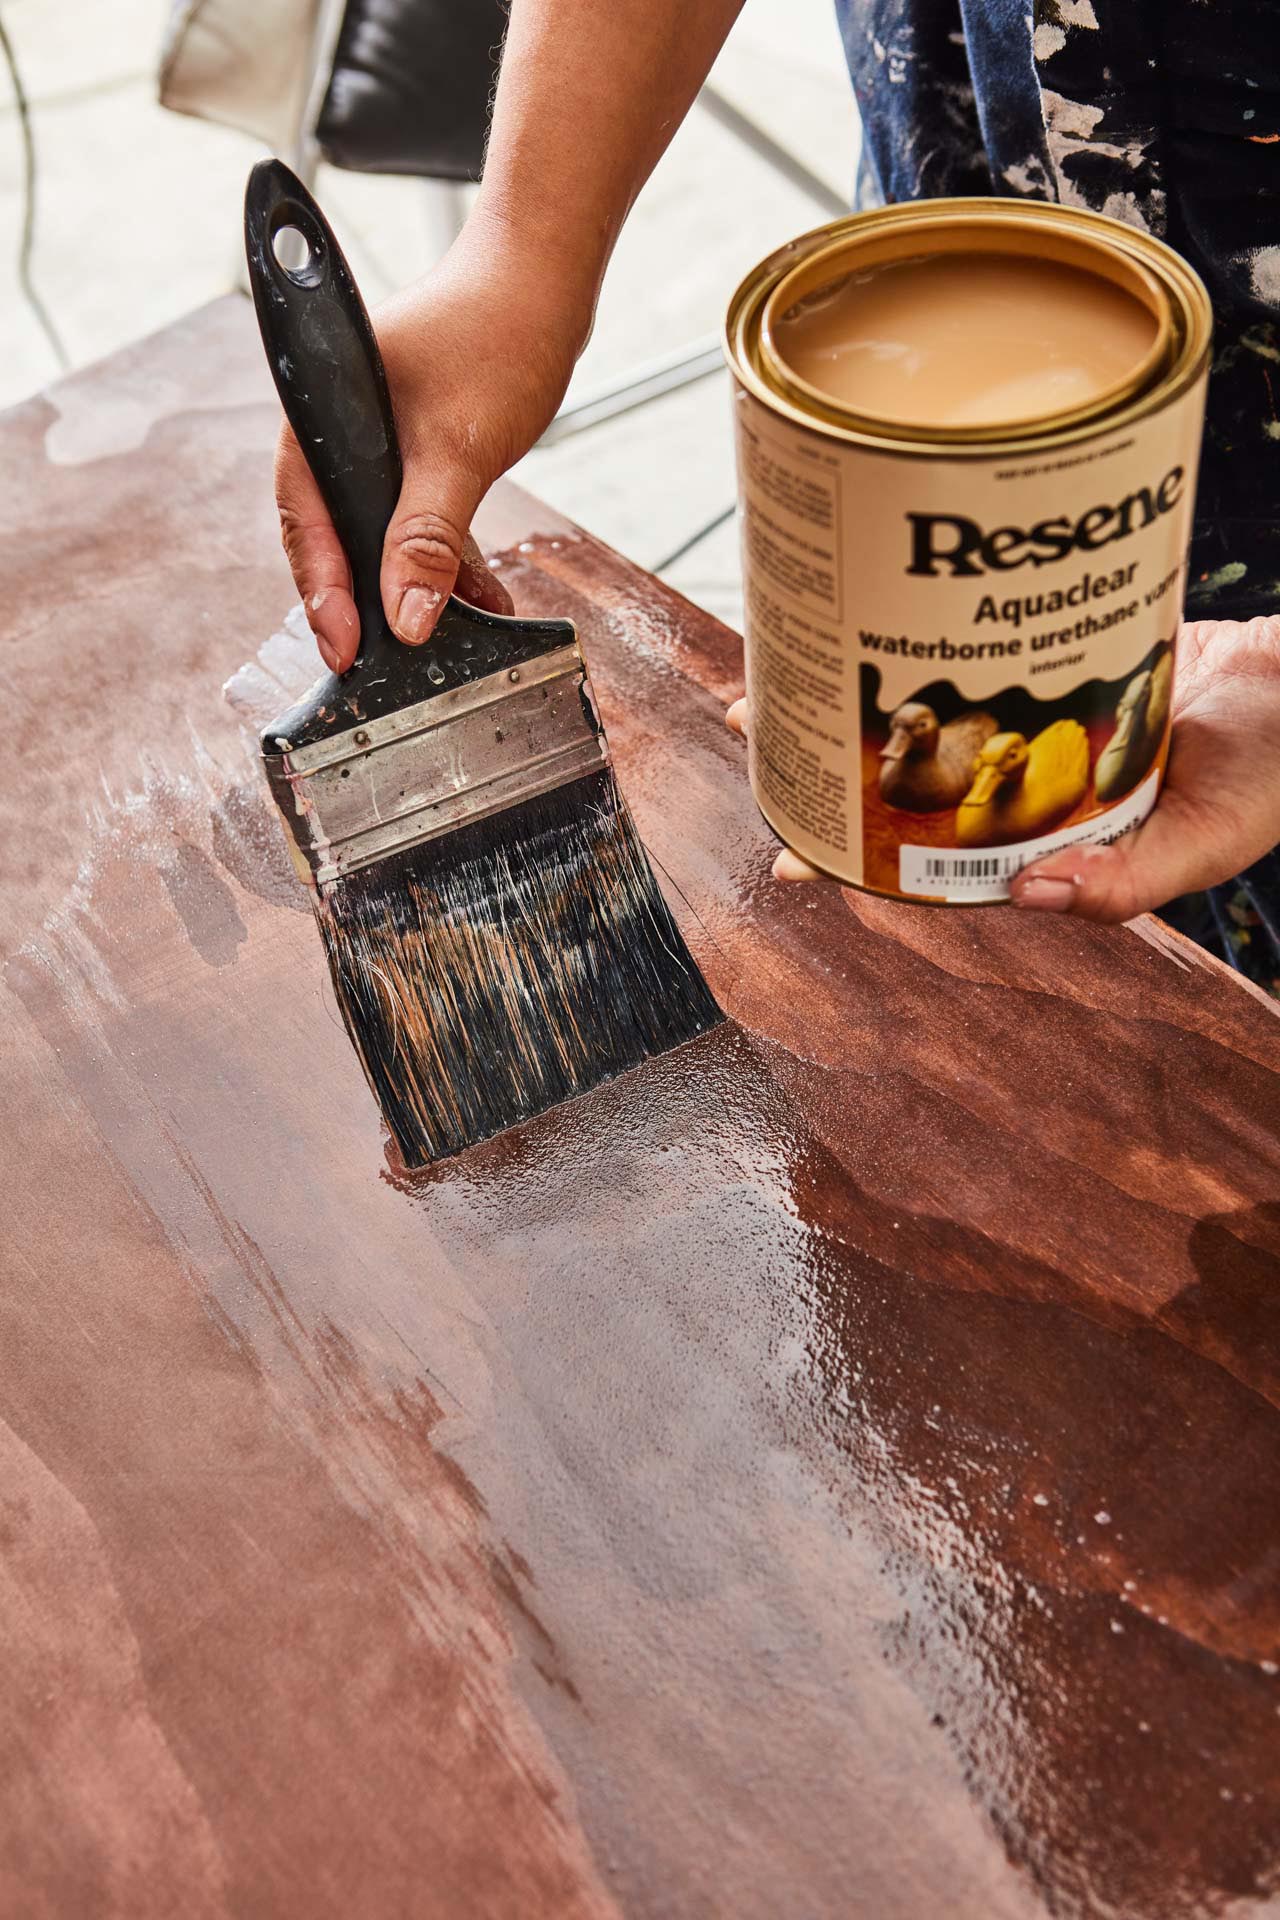 Painting stained wood-stained plywood with Resene Aquaclear waterborne urethane varnish